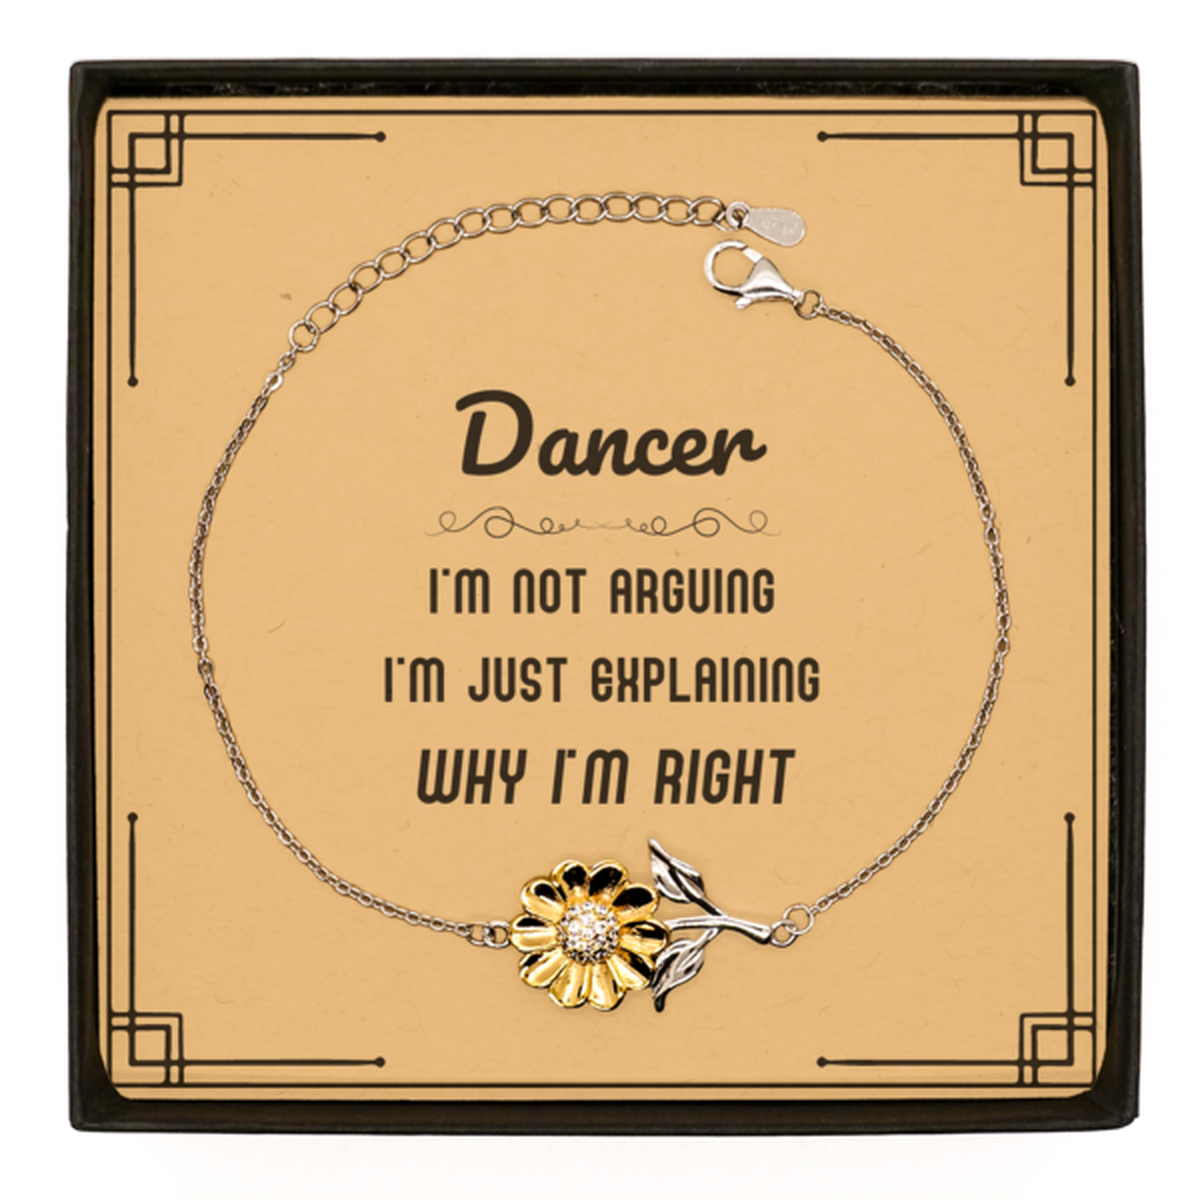 Dancer I'm not Arguing. I'm Just Explaining Why I'm RIGHT Sunflower Bracelet, Funny Saying Quote Dancer Gifts For Dancer Message Card Graduation Birthday Christmas Gifts for Men Women Coworker